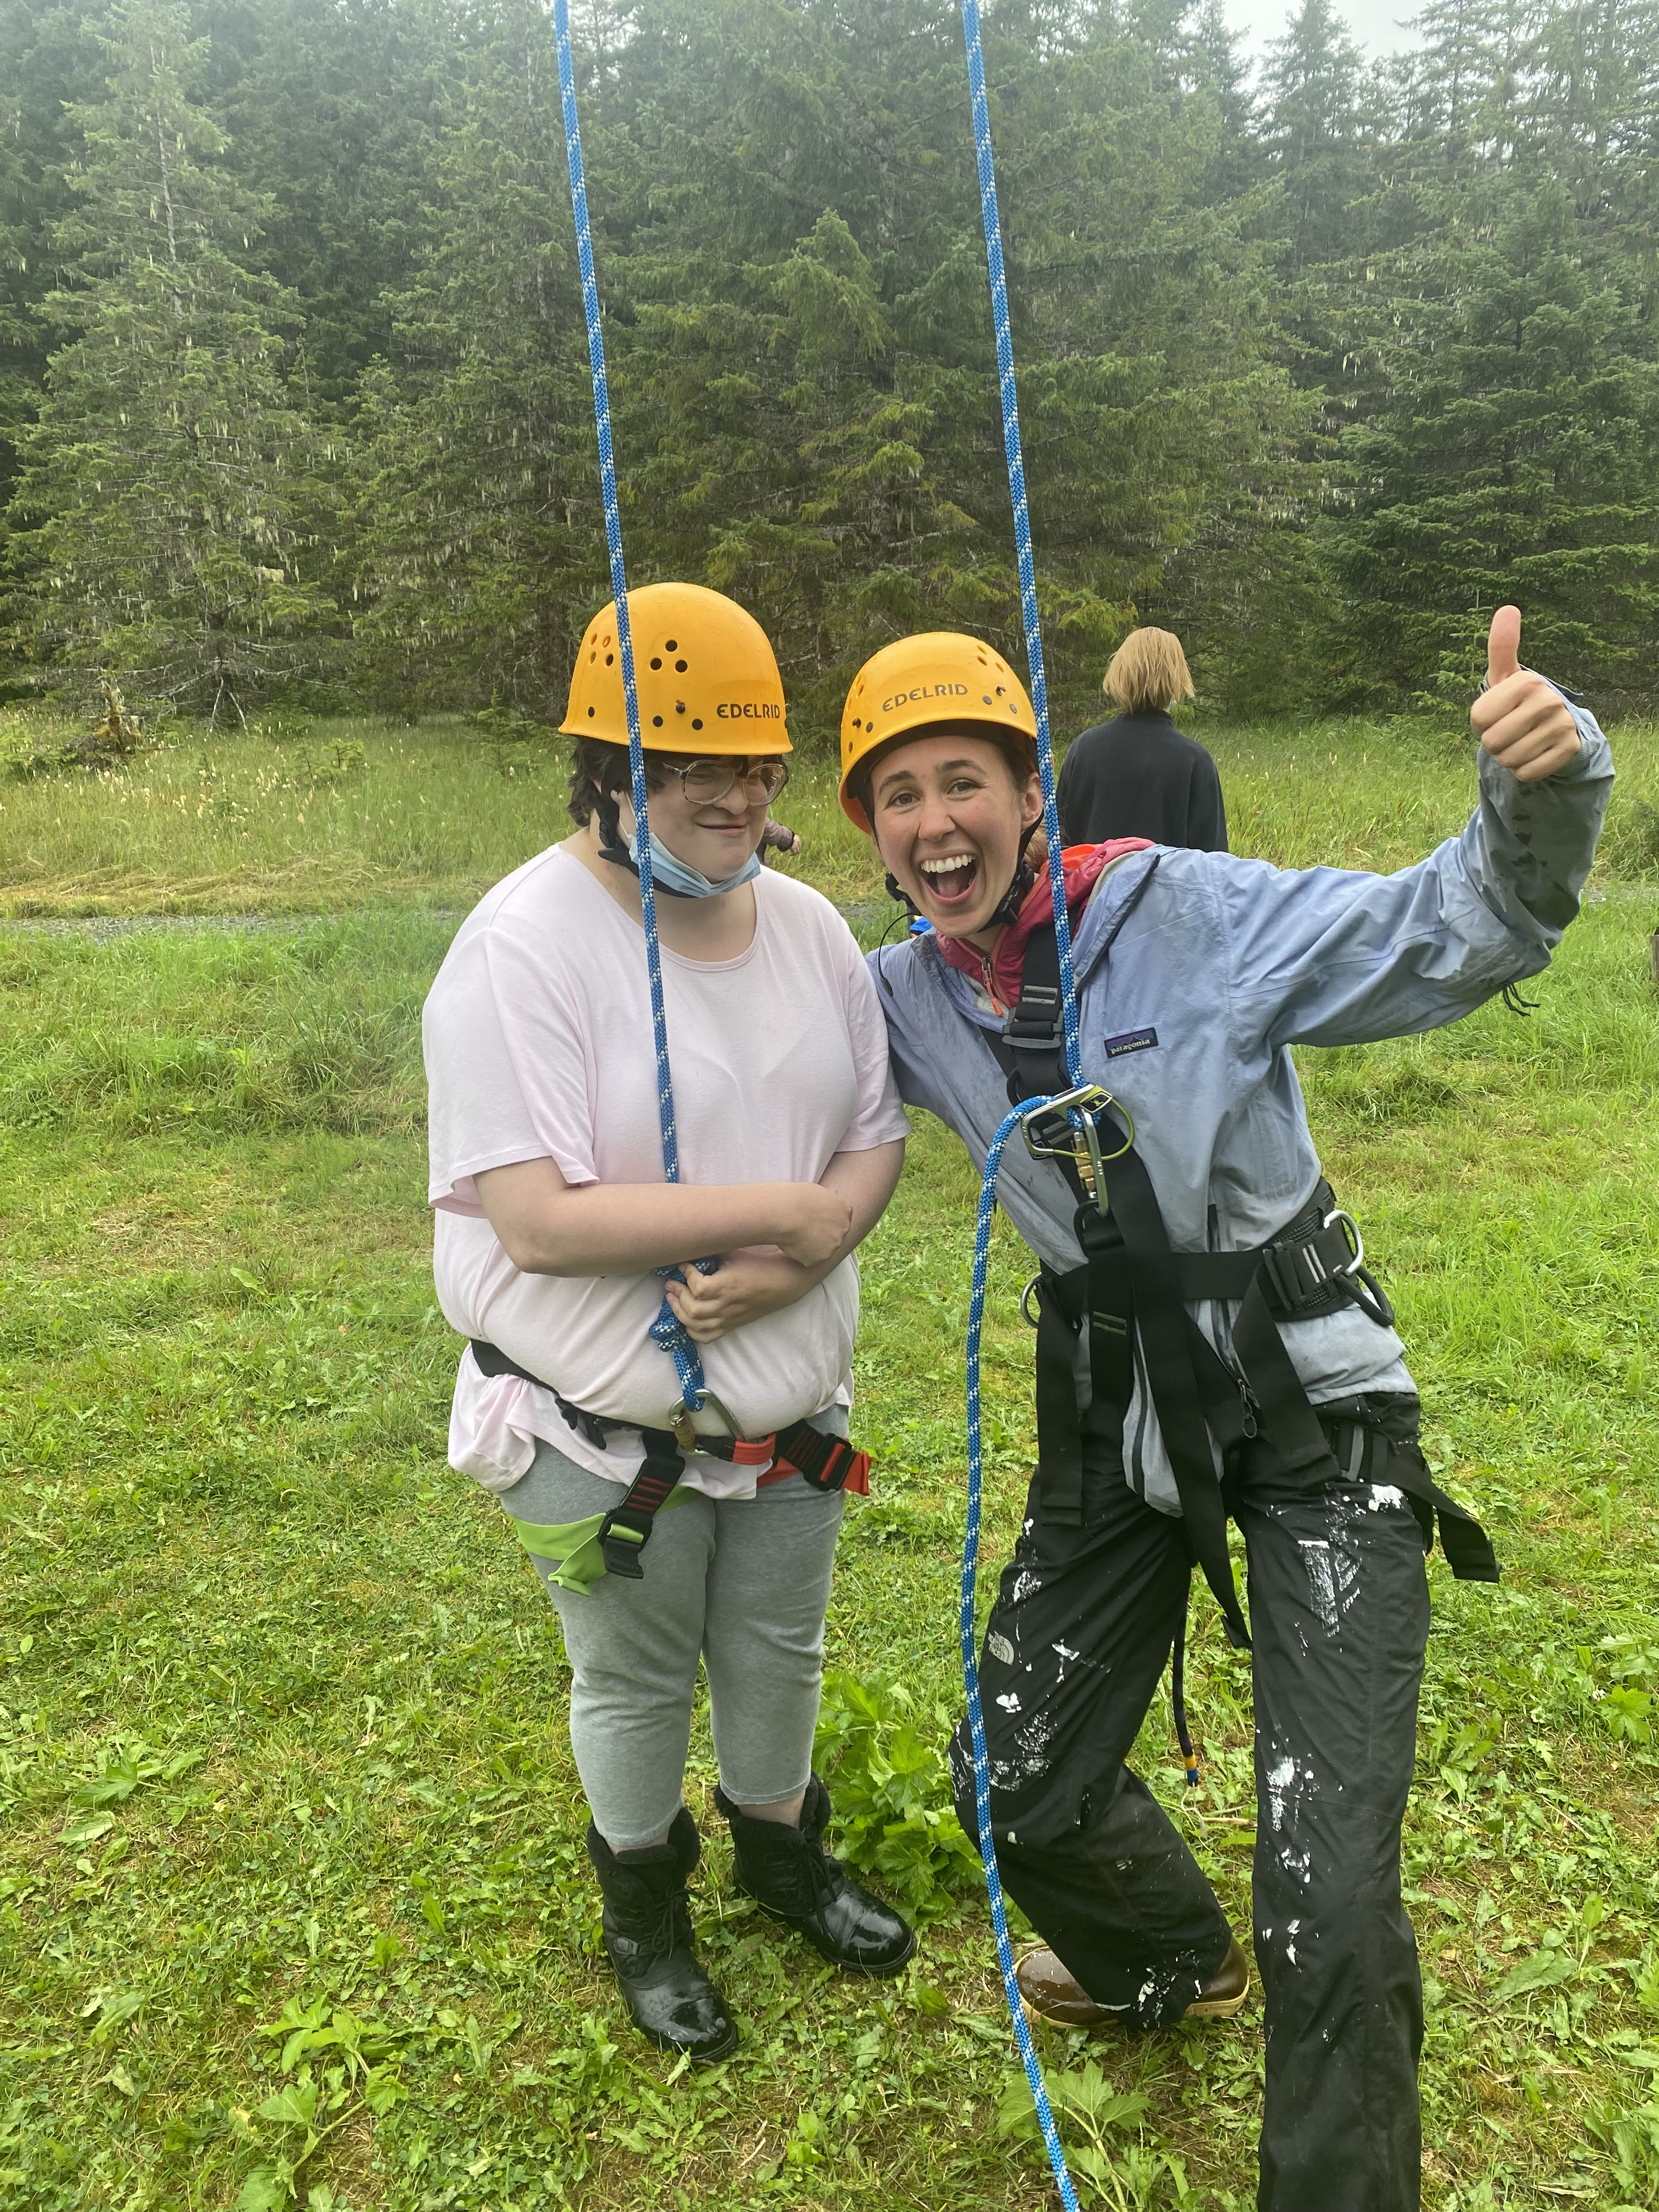 a young woman in white standing next to a young woman dressed in rain gear giving a thumbs up, both wearing climbing harnesses and roped up